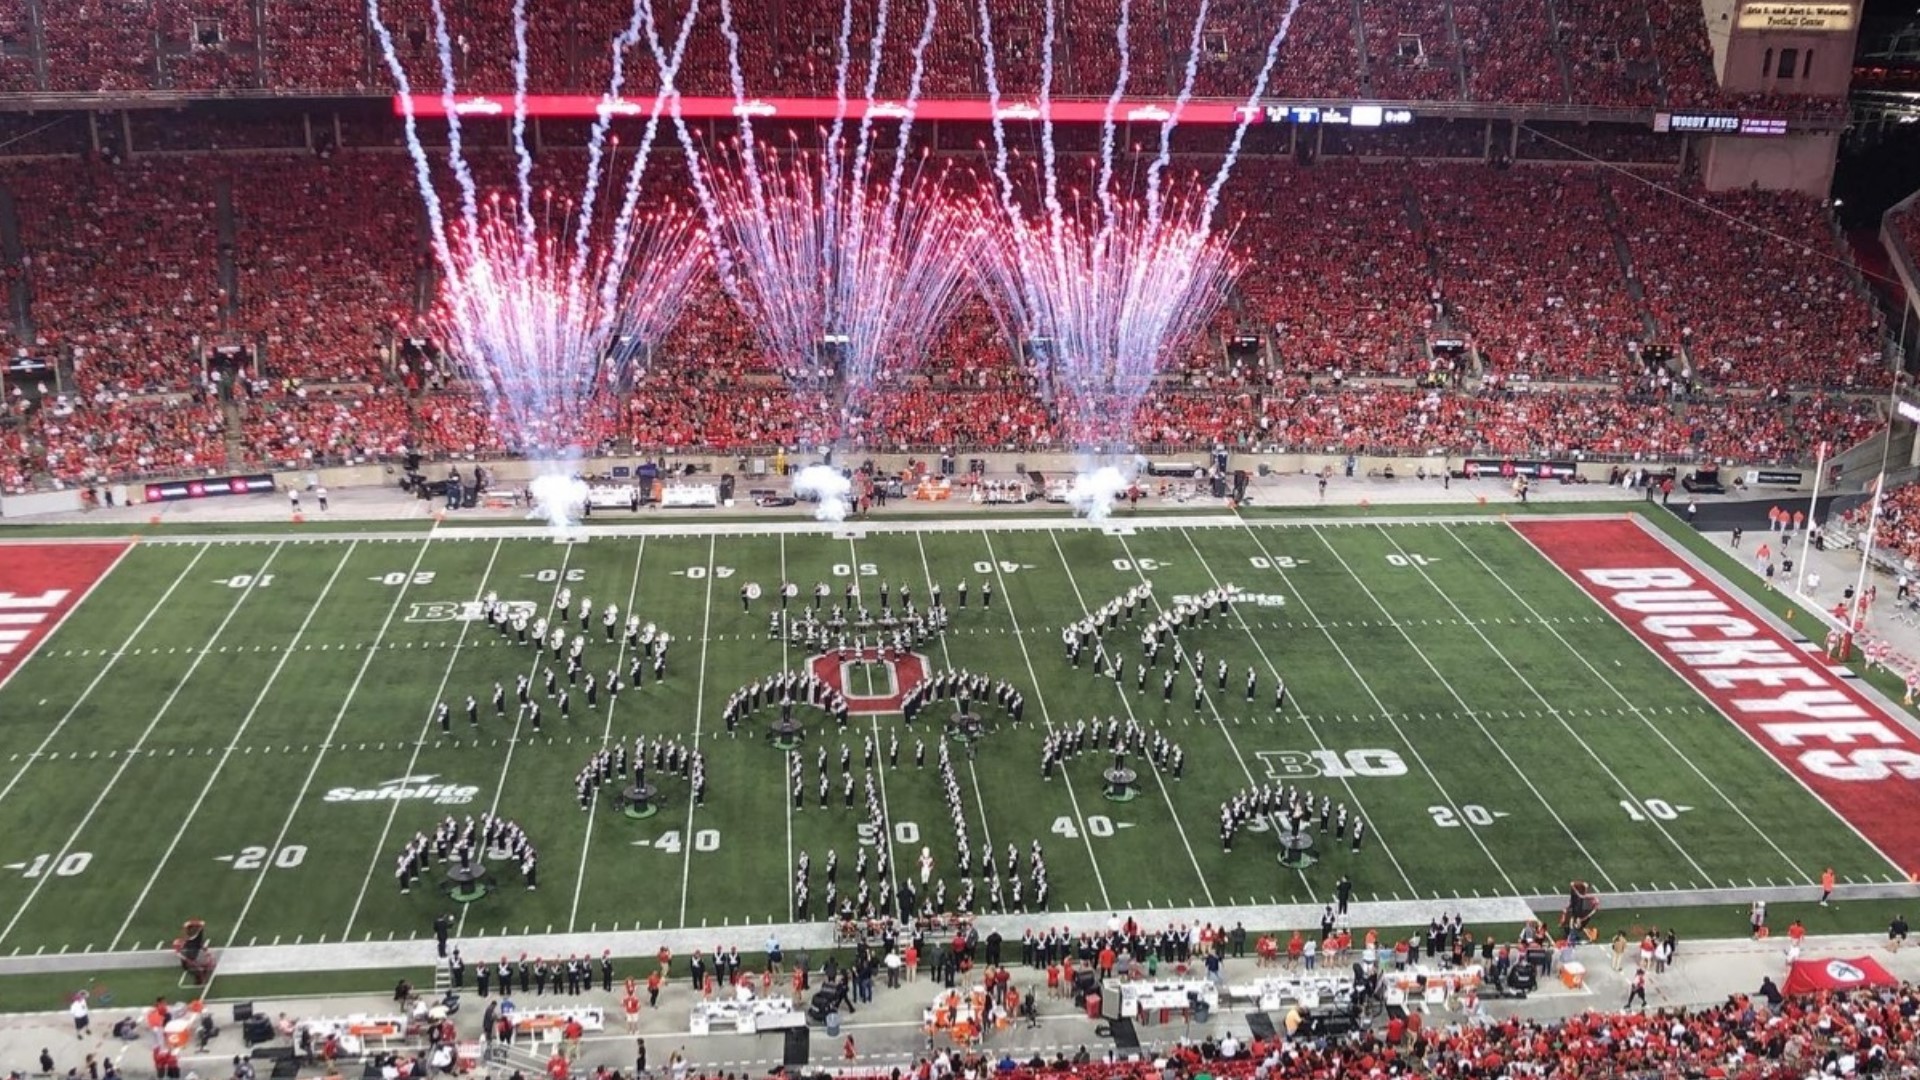 The Best Damn Band In The Land put on a trio of jazz performances inside Ohio Stadium Saturday night.